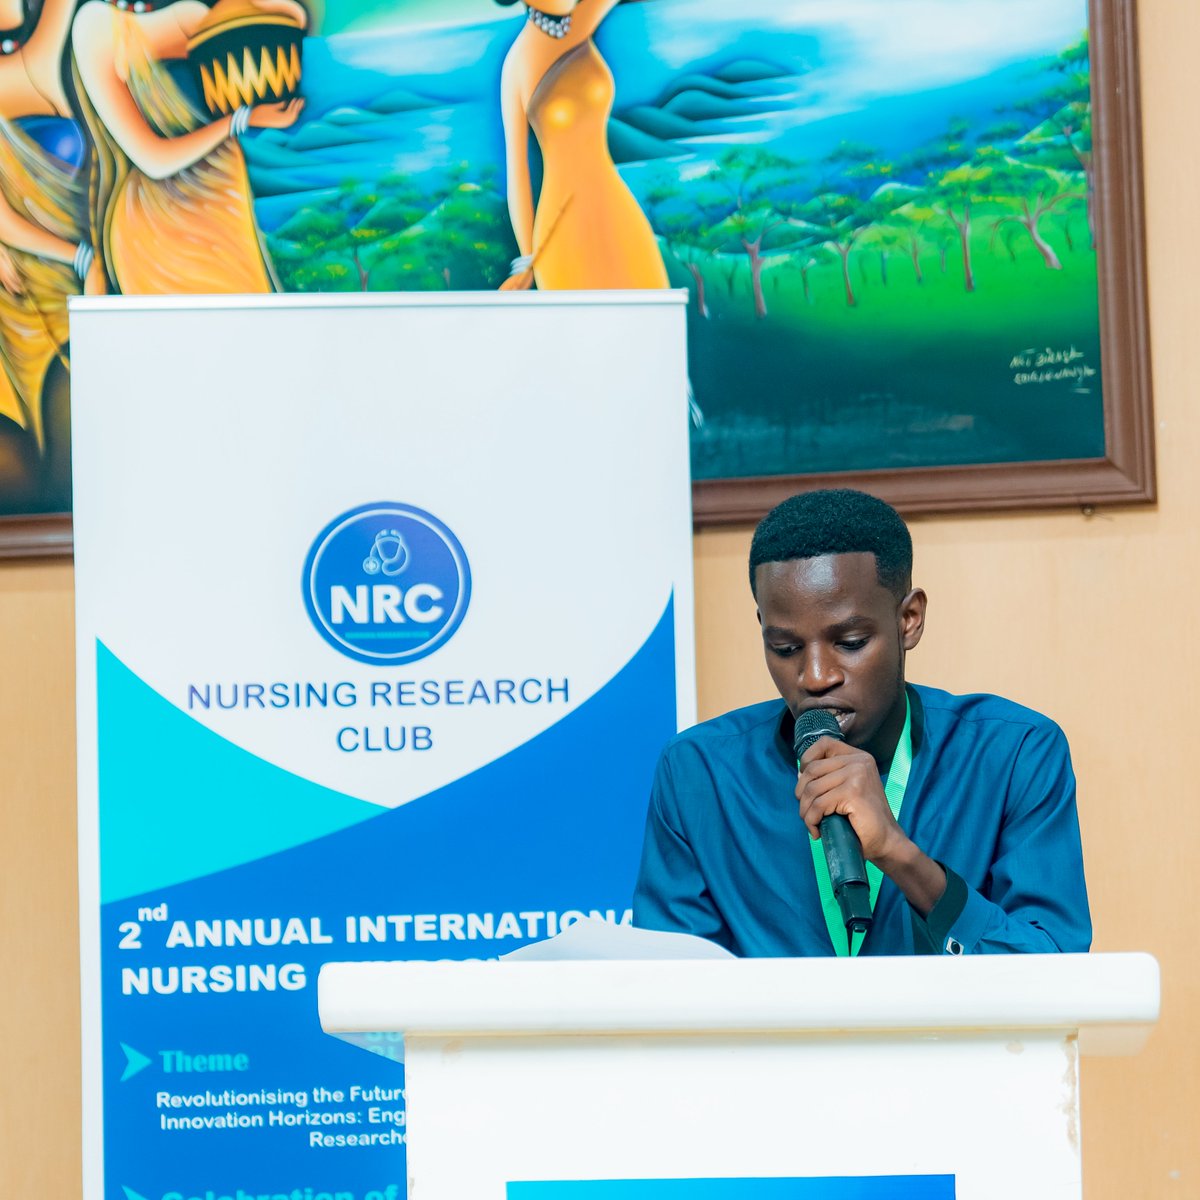 The event started with the welcoming speech of #NRC president @EloisHerve by appreciating and welcoming the honored guests and participants in general.